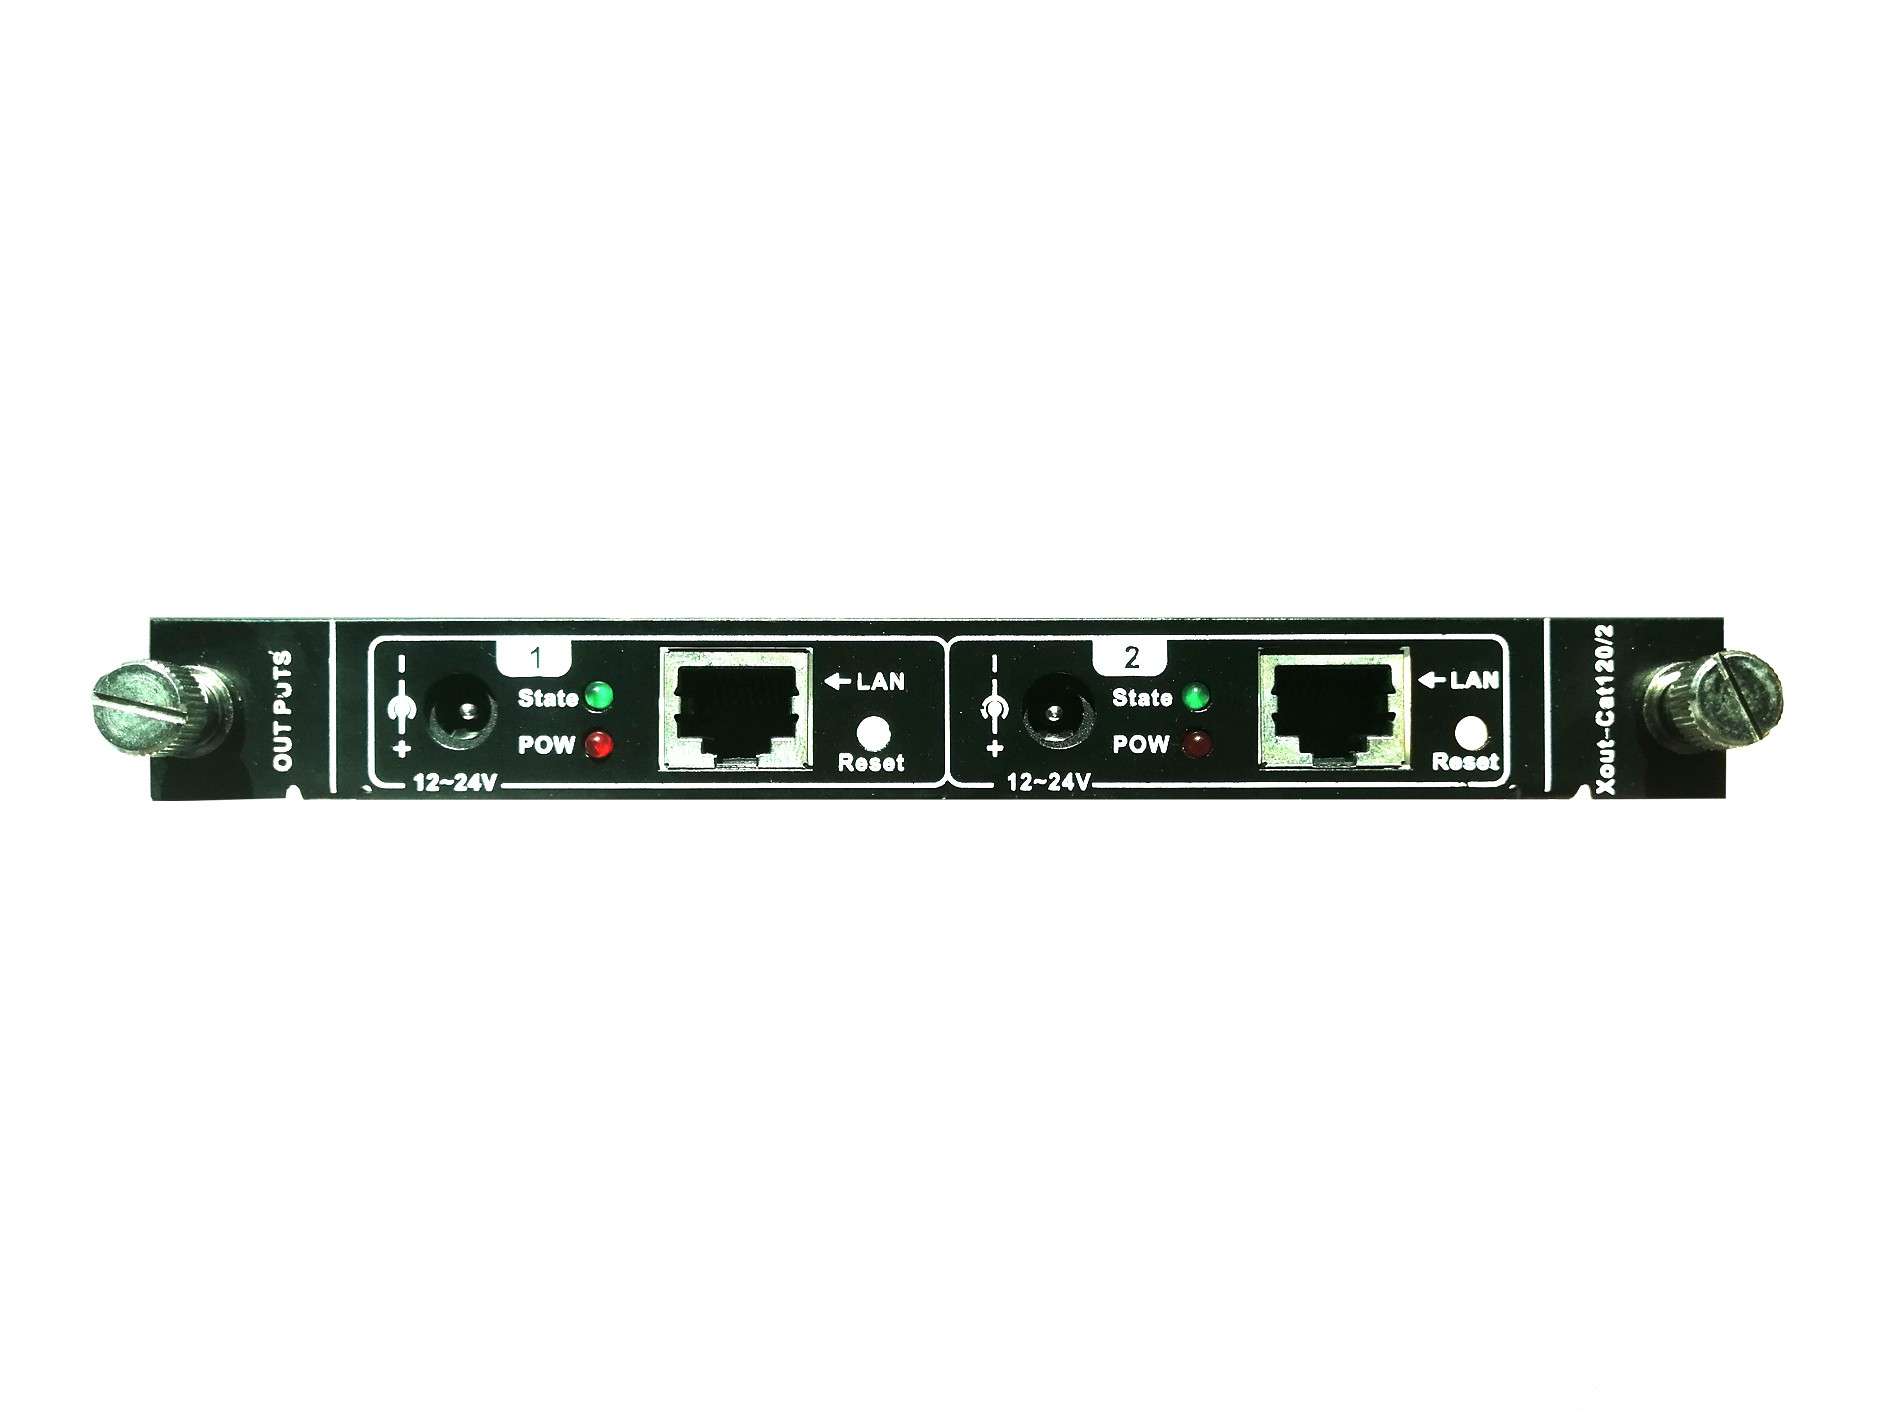 2 x HDBASET output signal boards